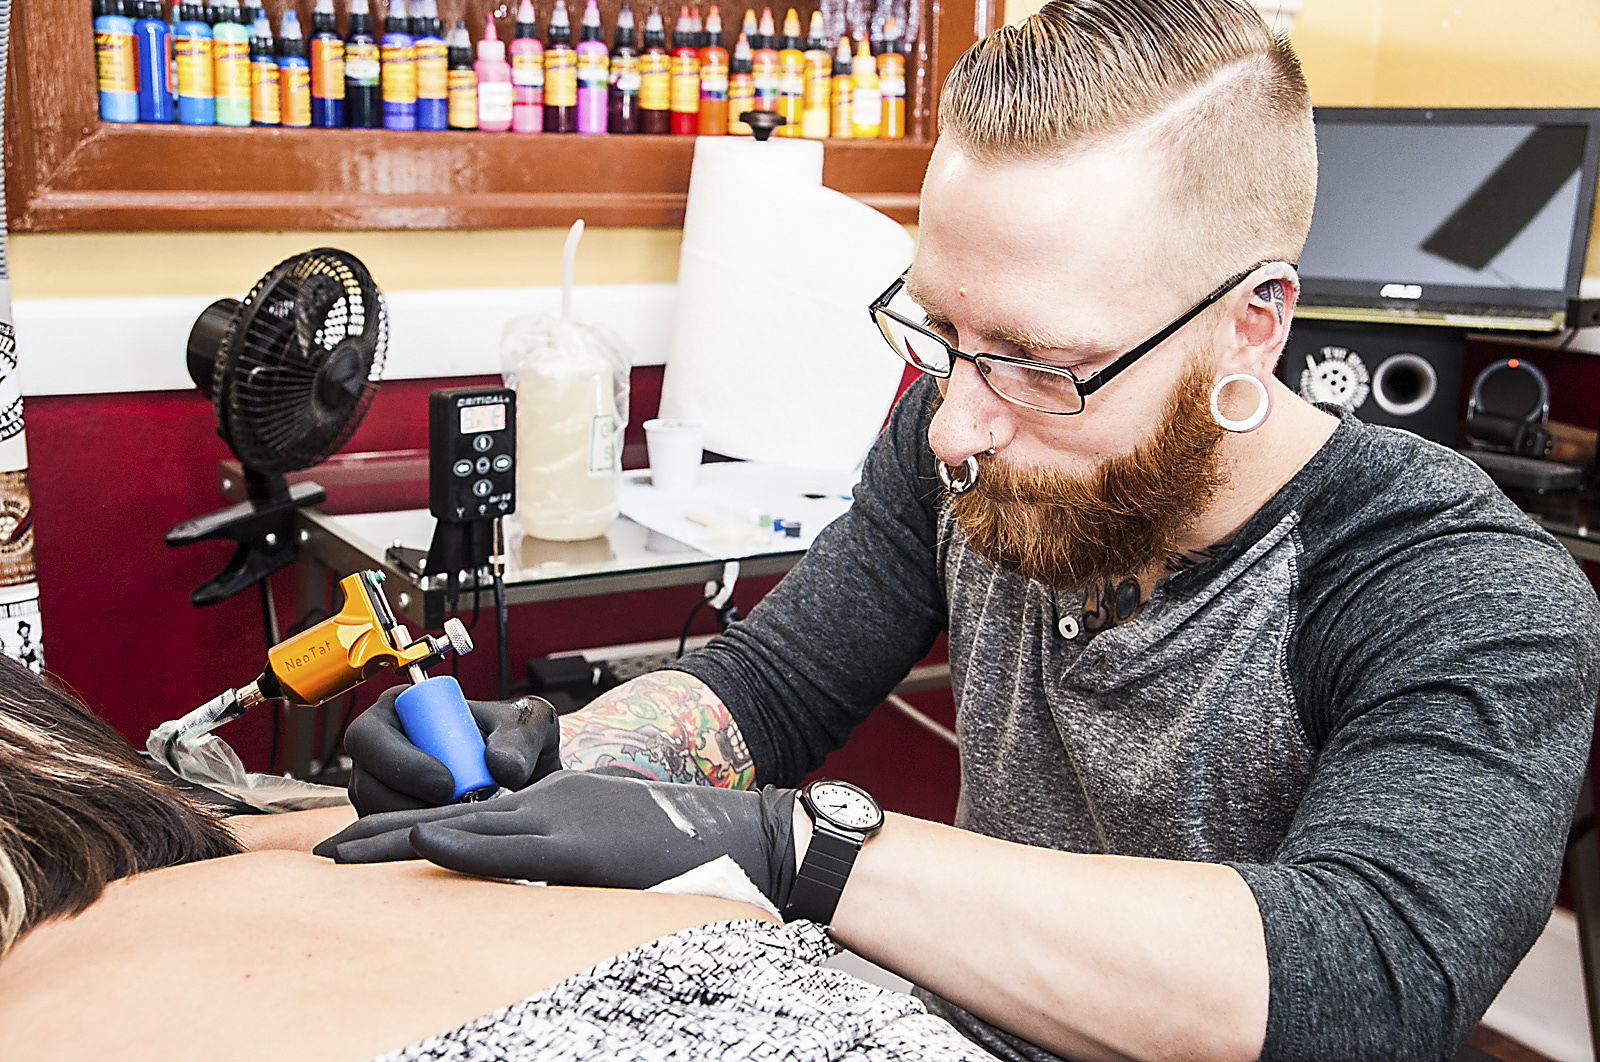 Are tattoos still taboo in the workplace?